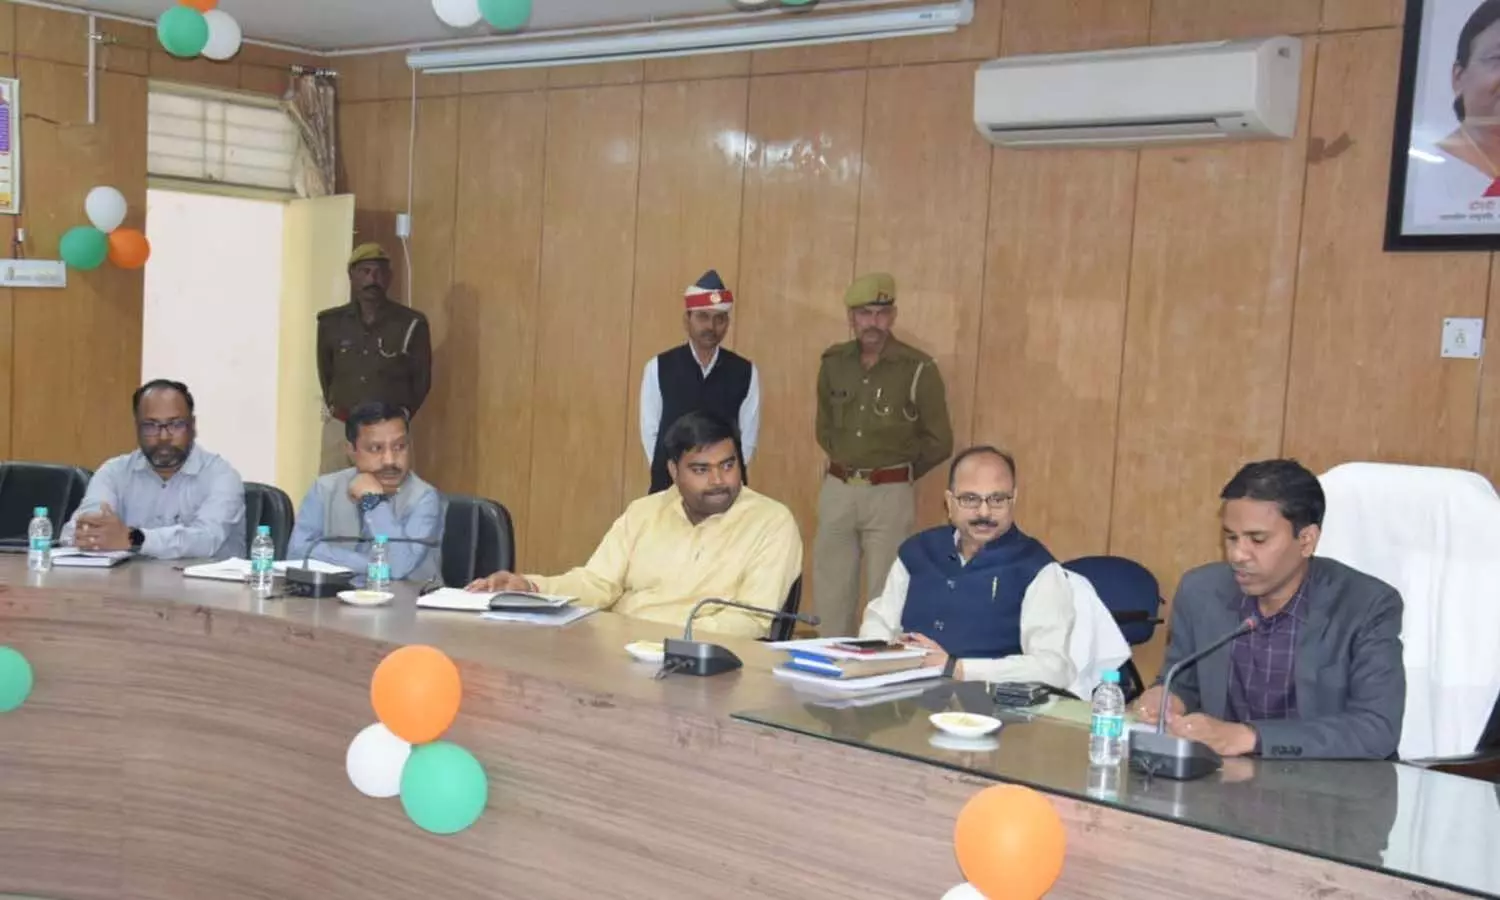 In Lakhimpur Kheri District Level Vigilance Committee meeting, DM reviewed food grains distribution system, gave instructions